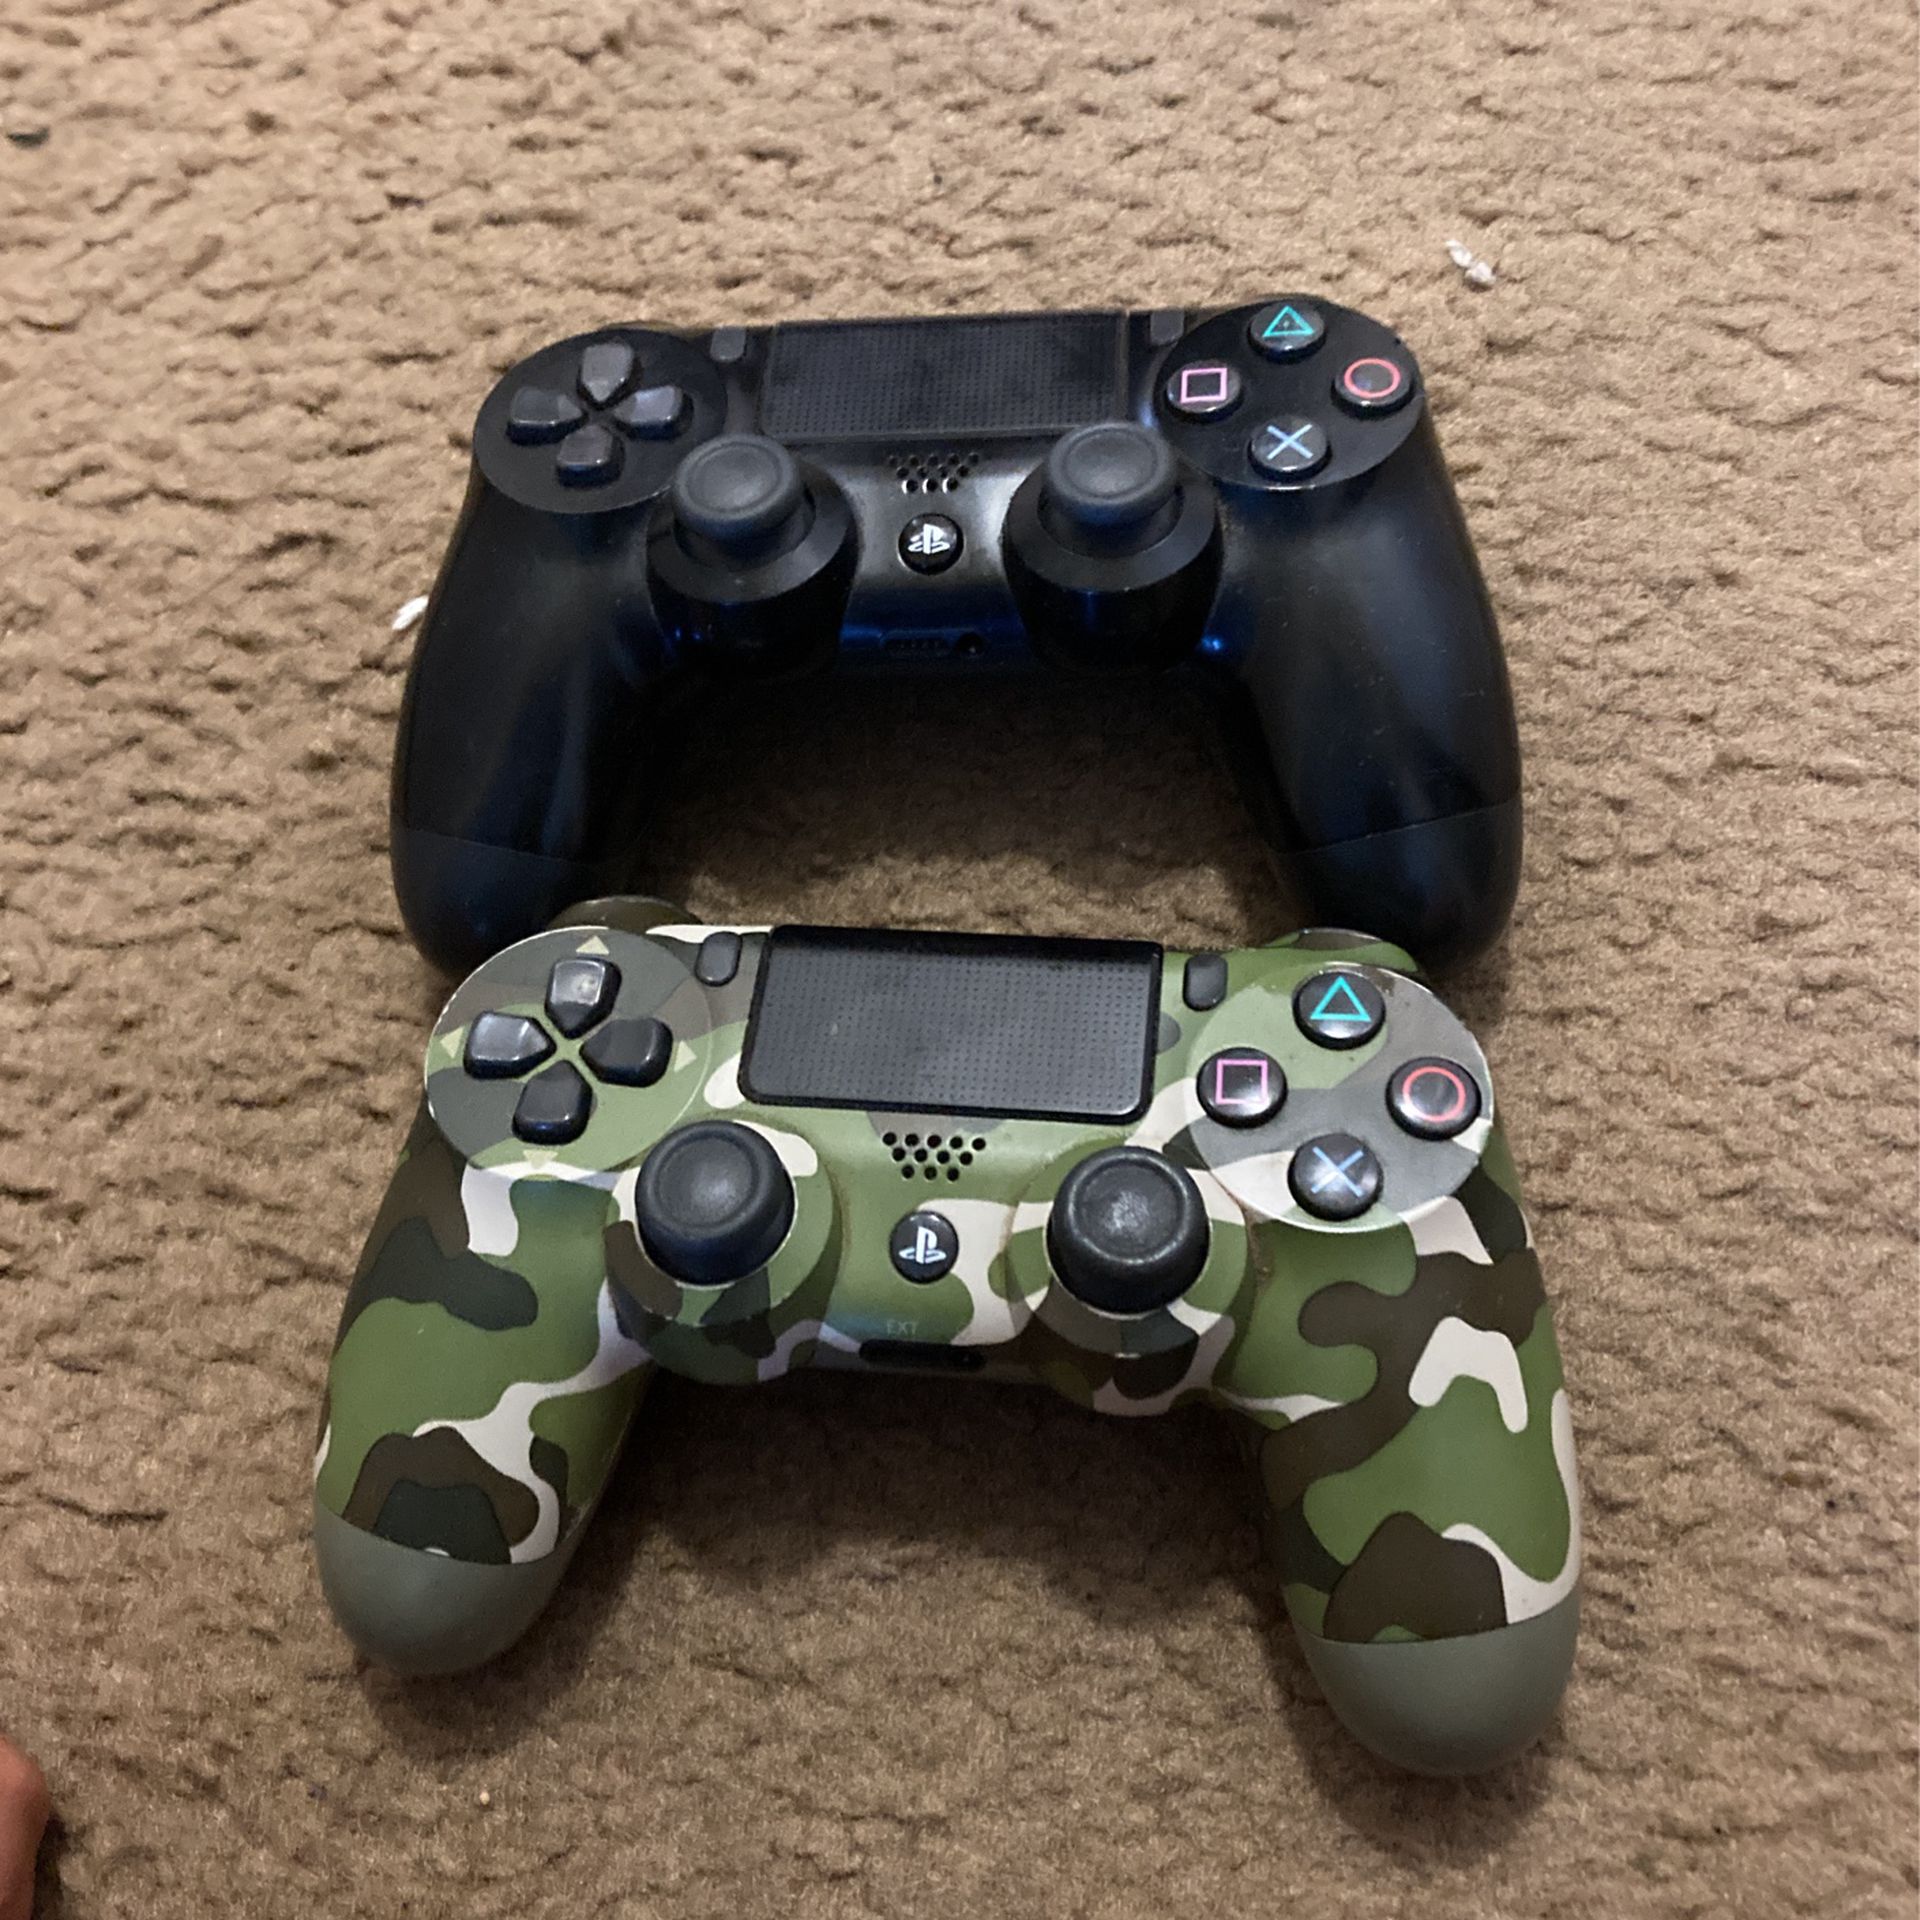 2 ps4 controllers fully working